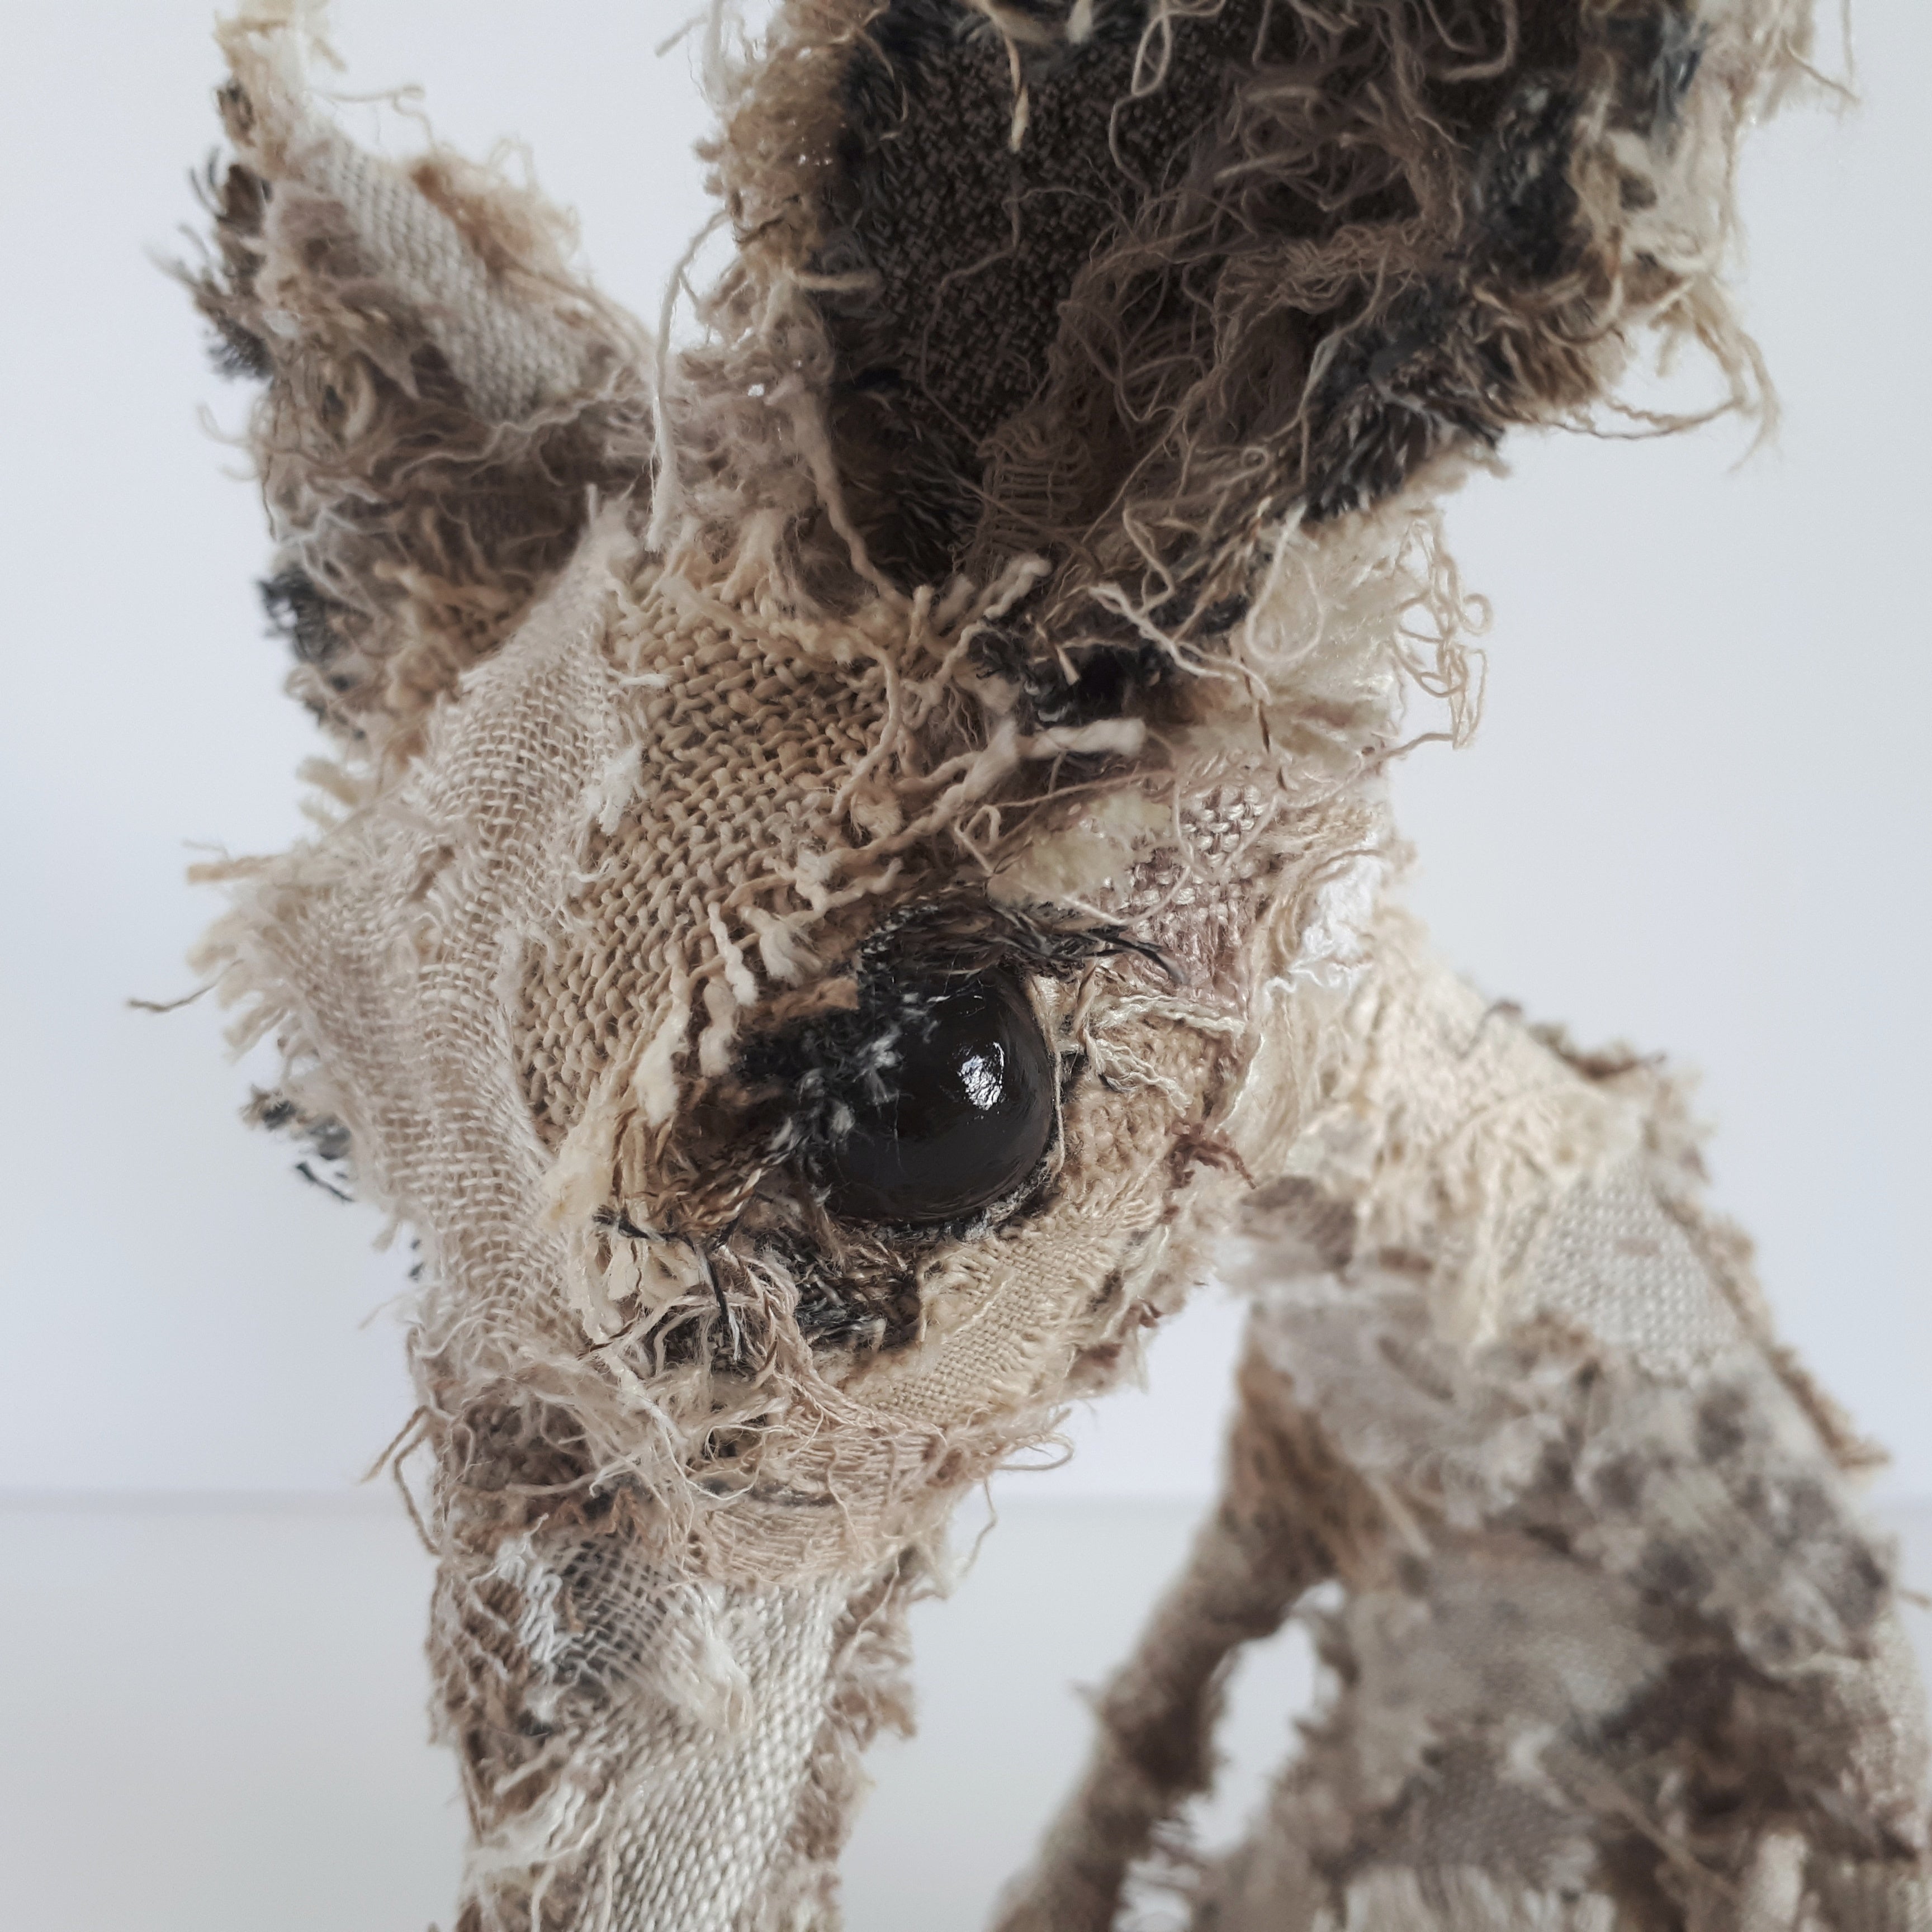 Rat textile sculpture by Susan Bowers created from vintage and antique textiles